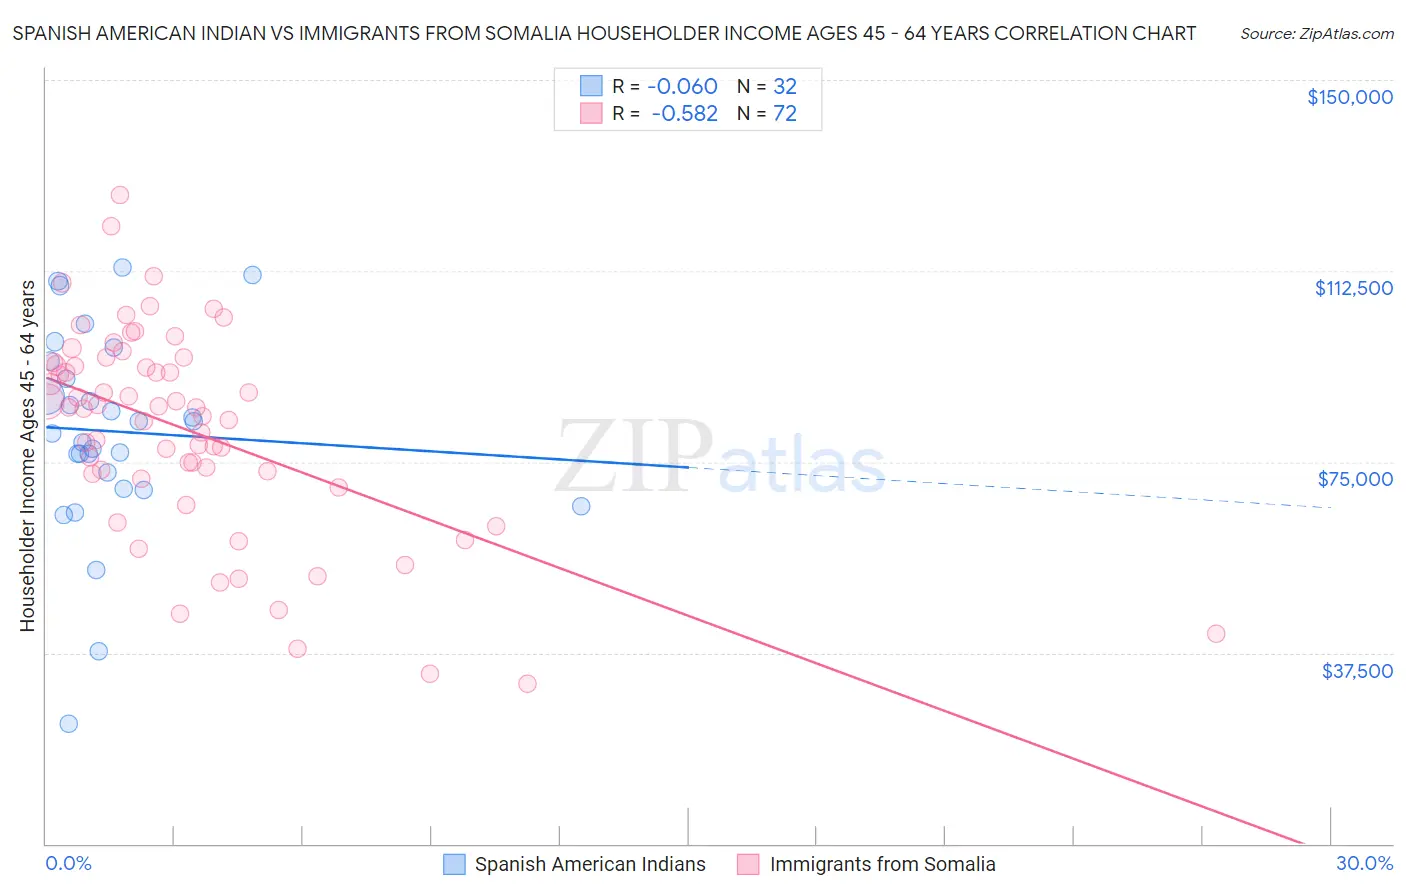 Spanish American Indian vs Immigrants from Somalia Householder Income Ages 45 - 64 years